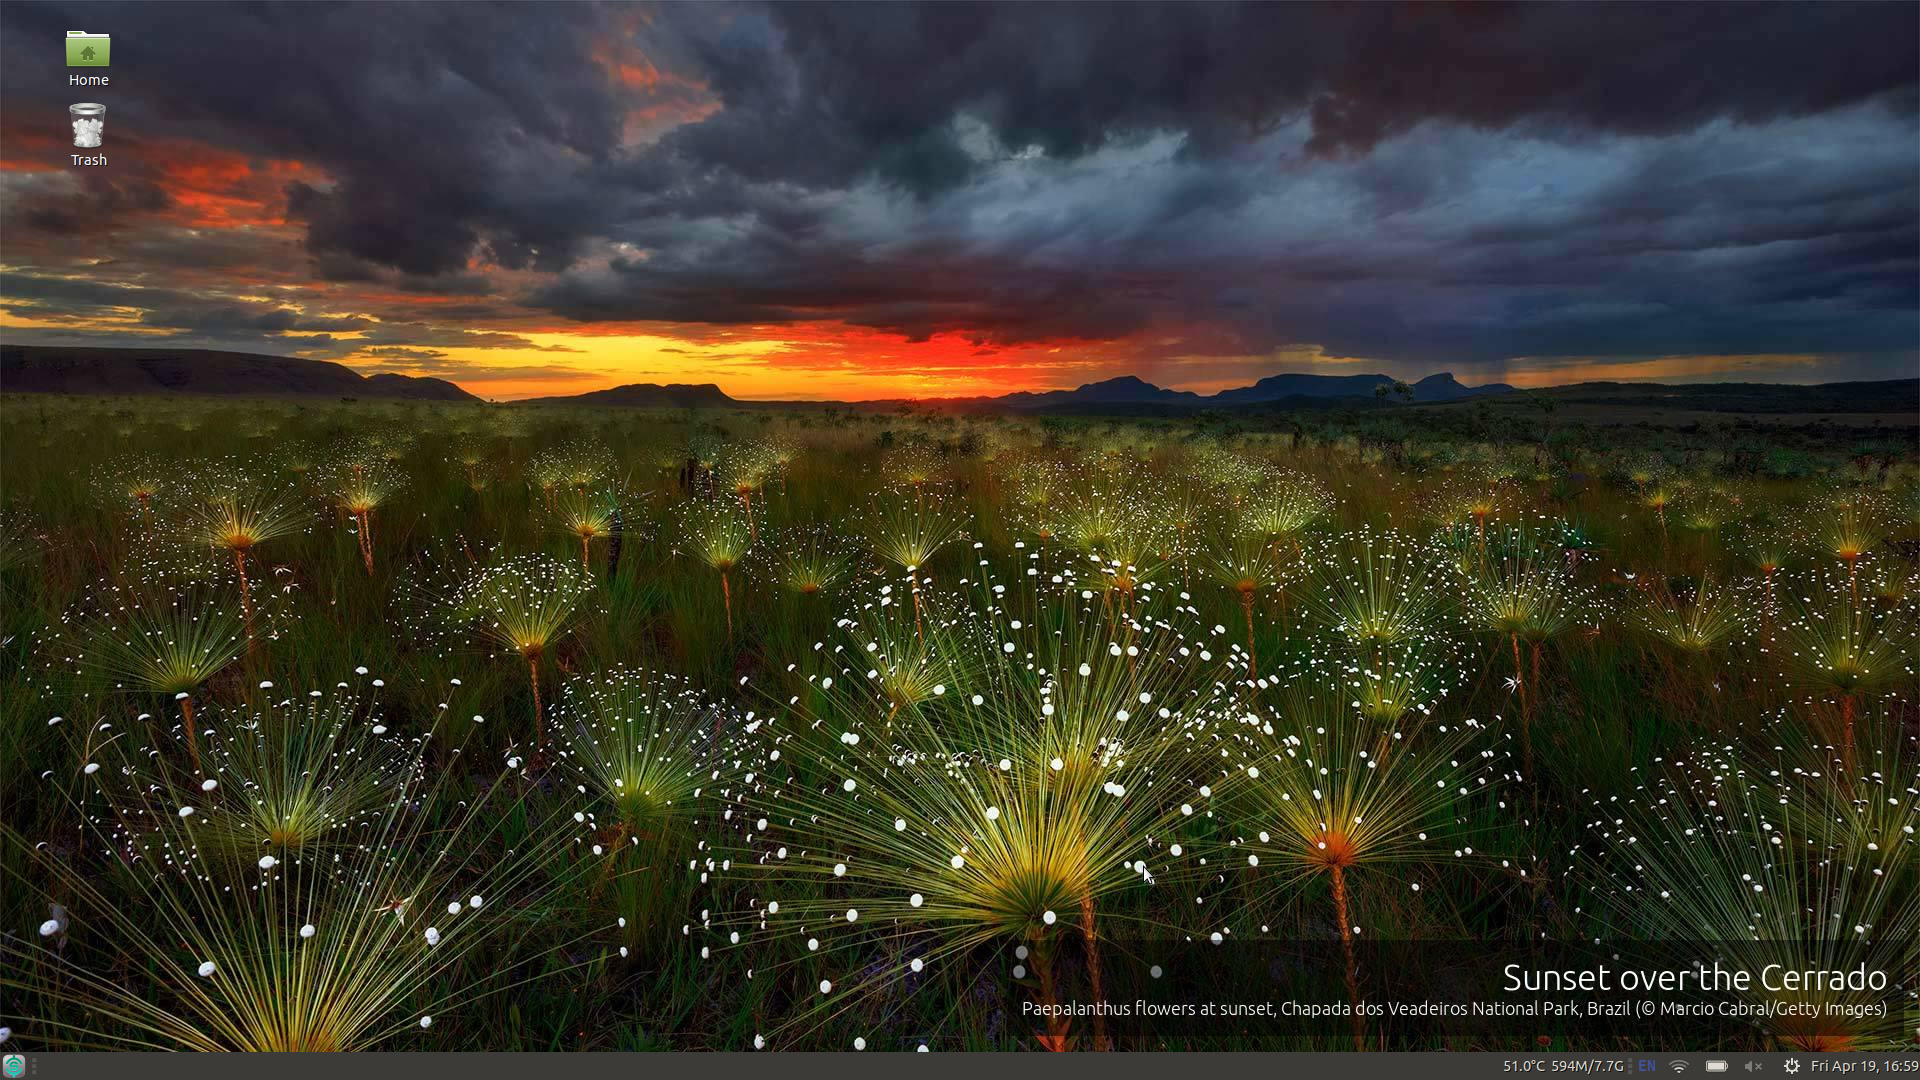 Bing Wallpaper updates your desktop with Bing's image of the day